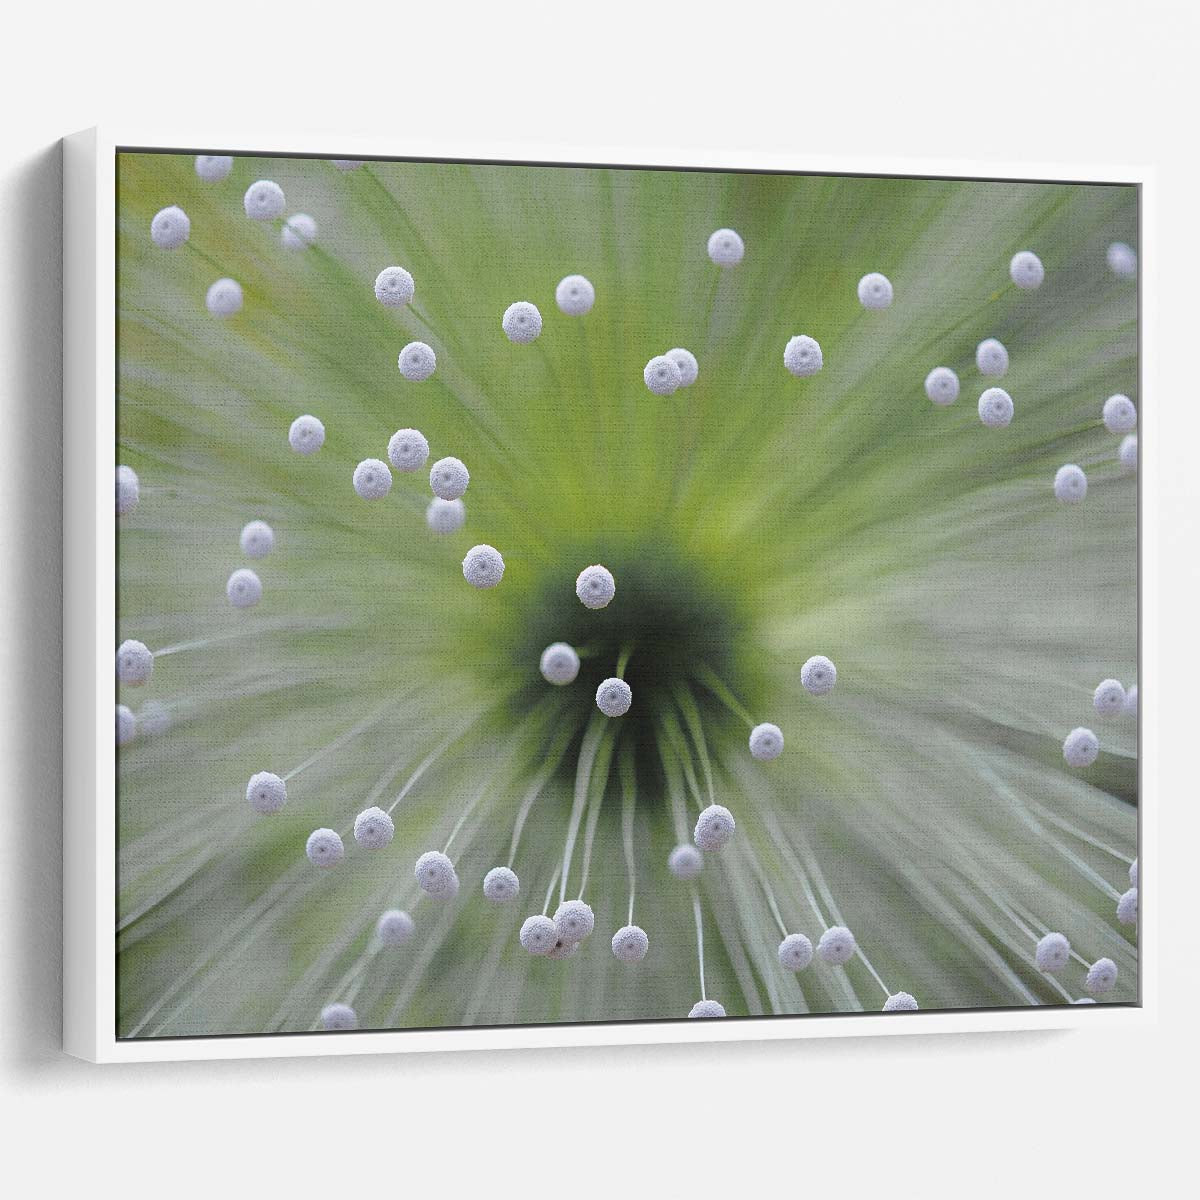 Delicate Macro Floral Bokeh Brazil Wall Art by Luxuriance Designs. Made in USA.